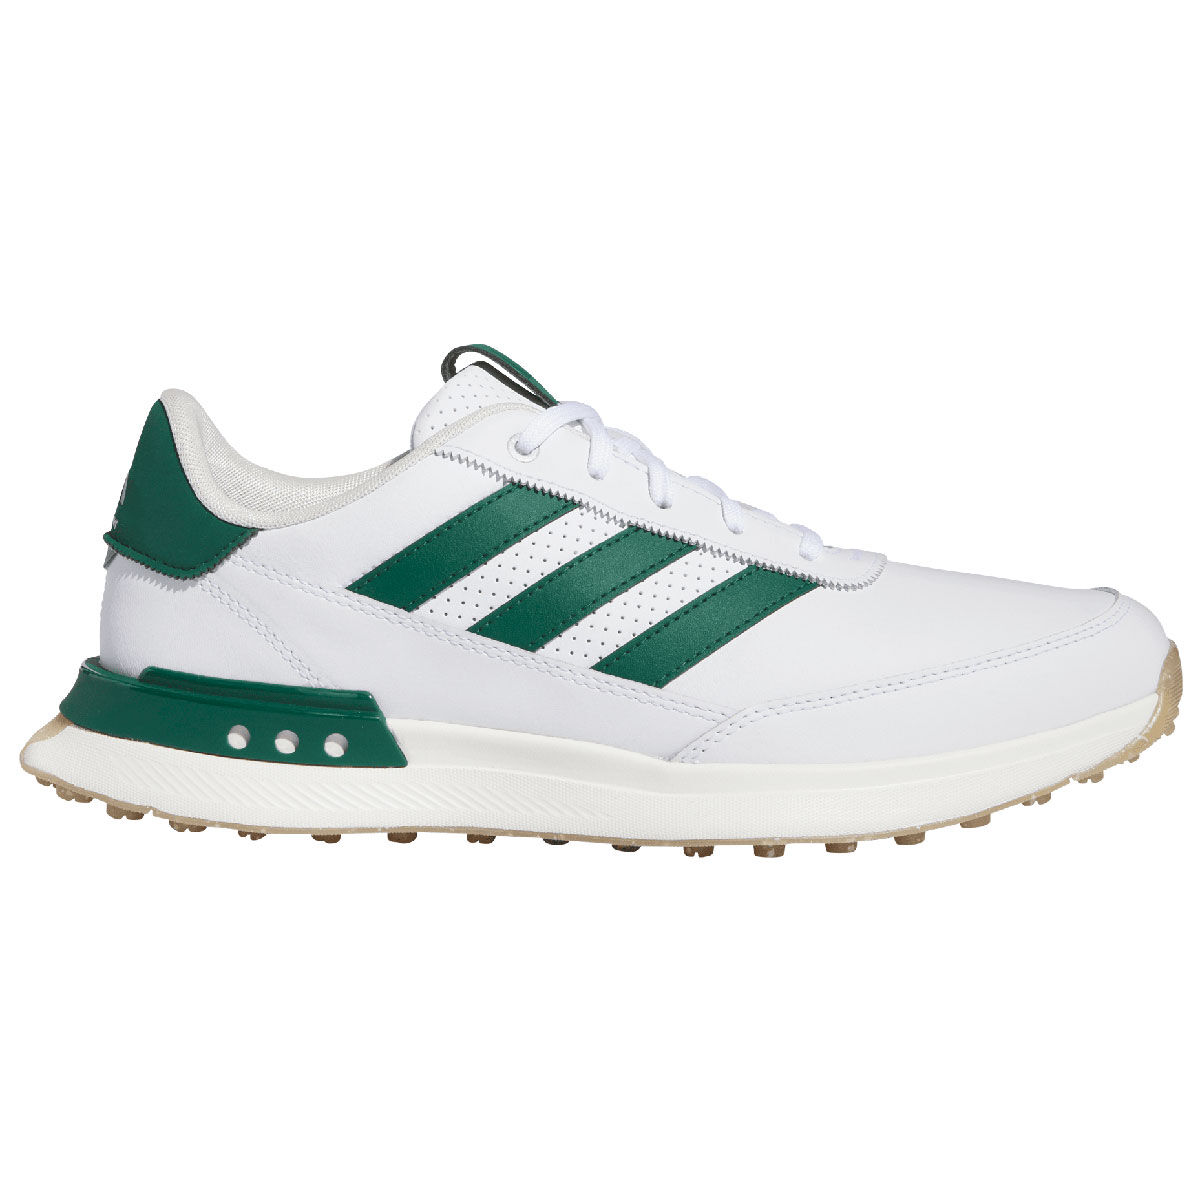 adidas S2G Leather 24 Waterproof Spikeless Golf Shoes, Mens, White/collegiate green/gum4, 10 | American Golf